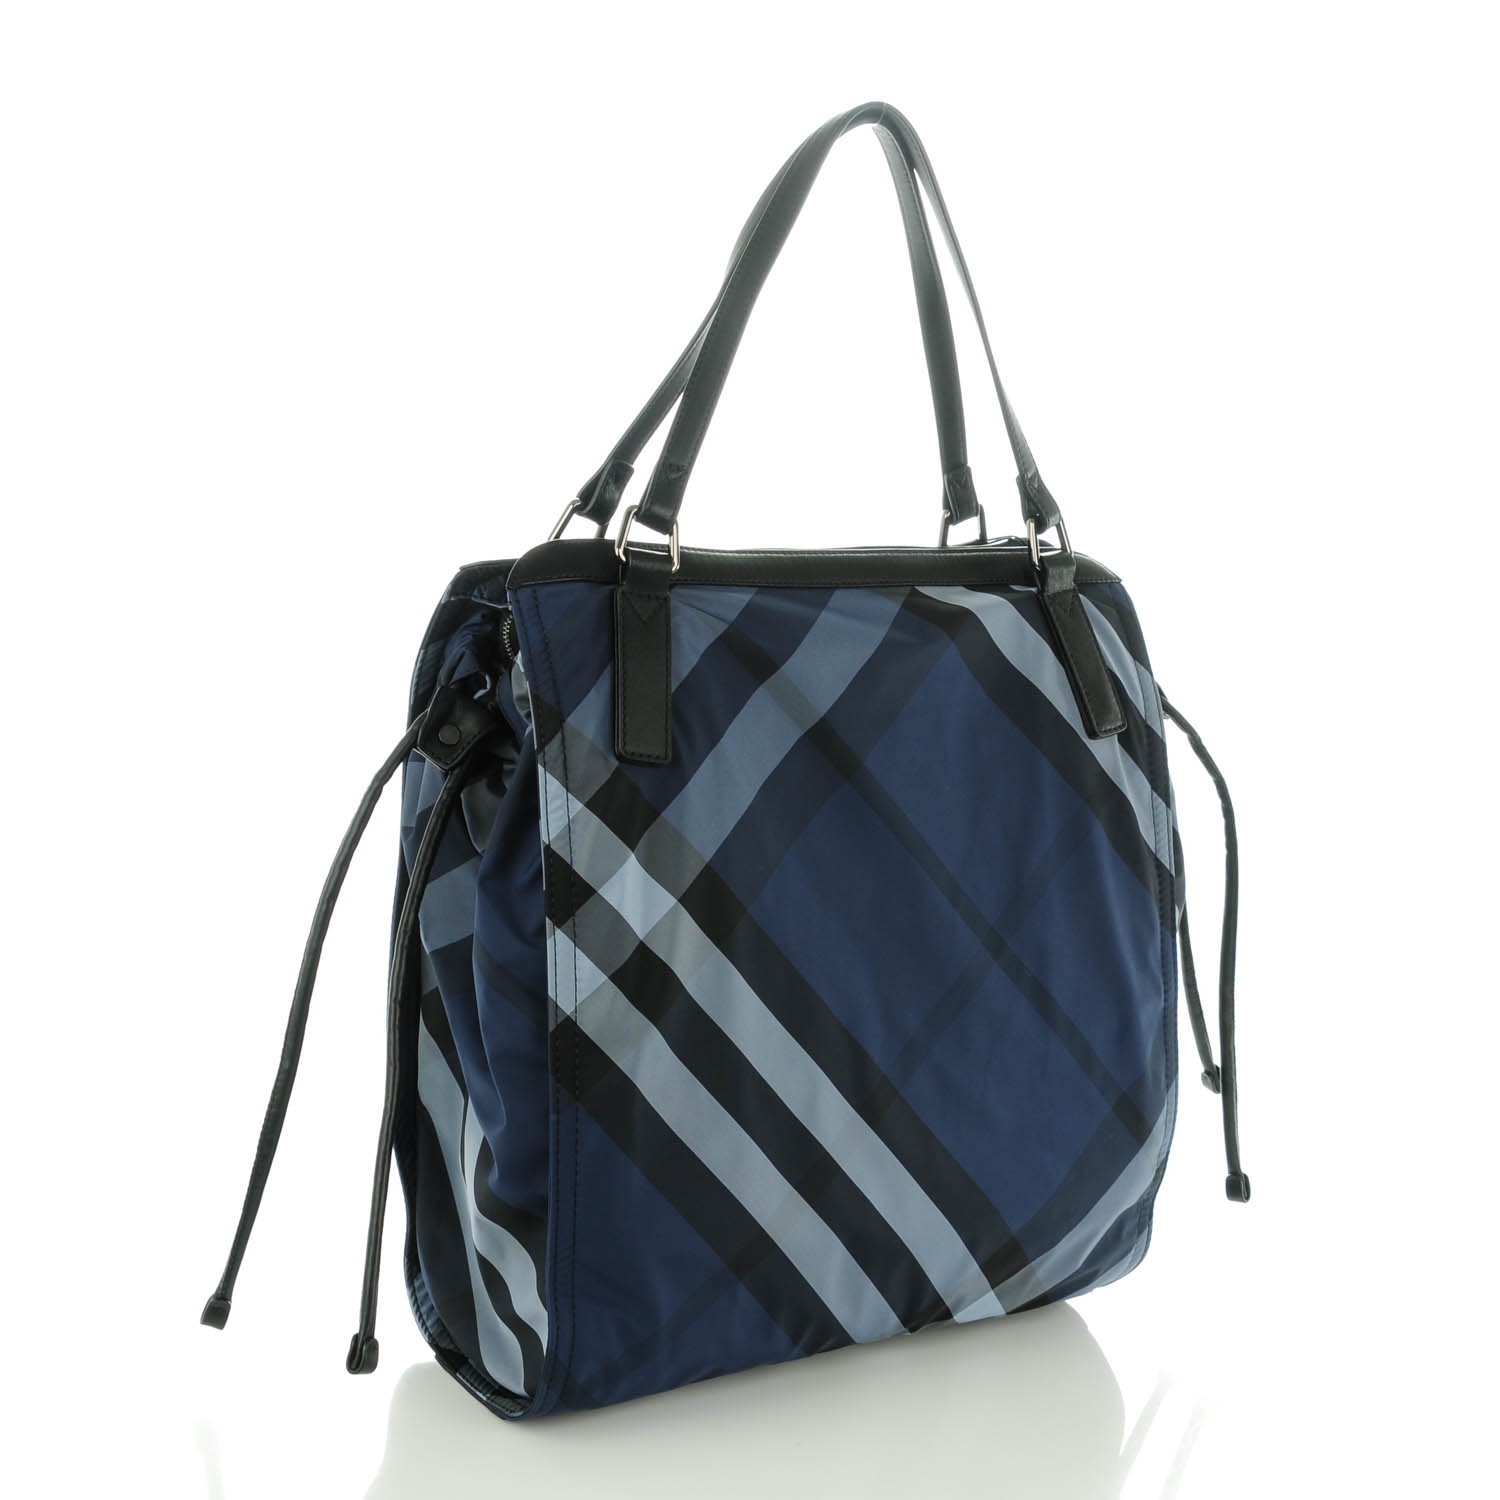 BURBERRY Nylon Check Small Buckleigh Packable Tote Navy Blue 143522